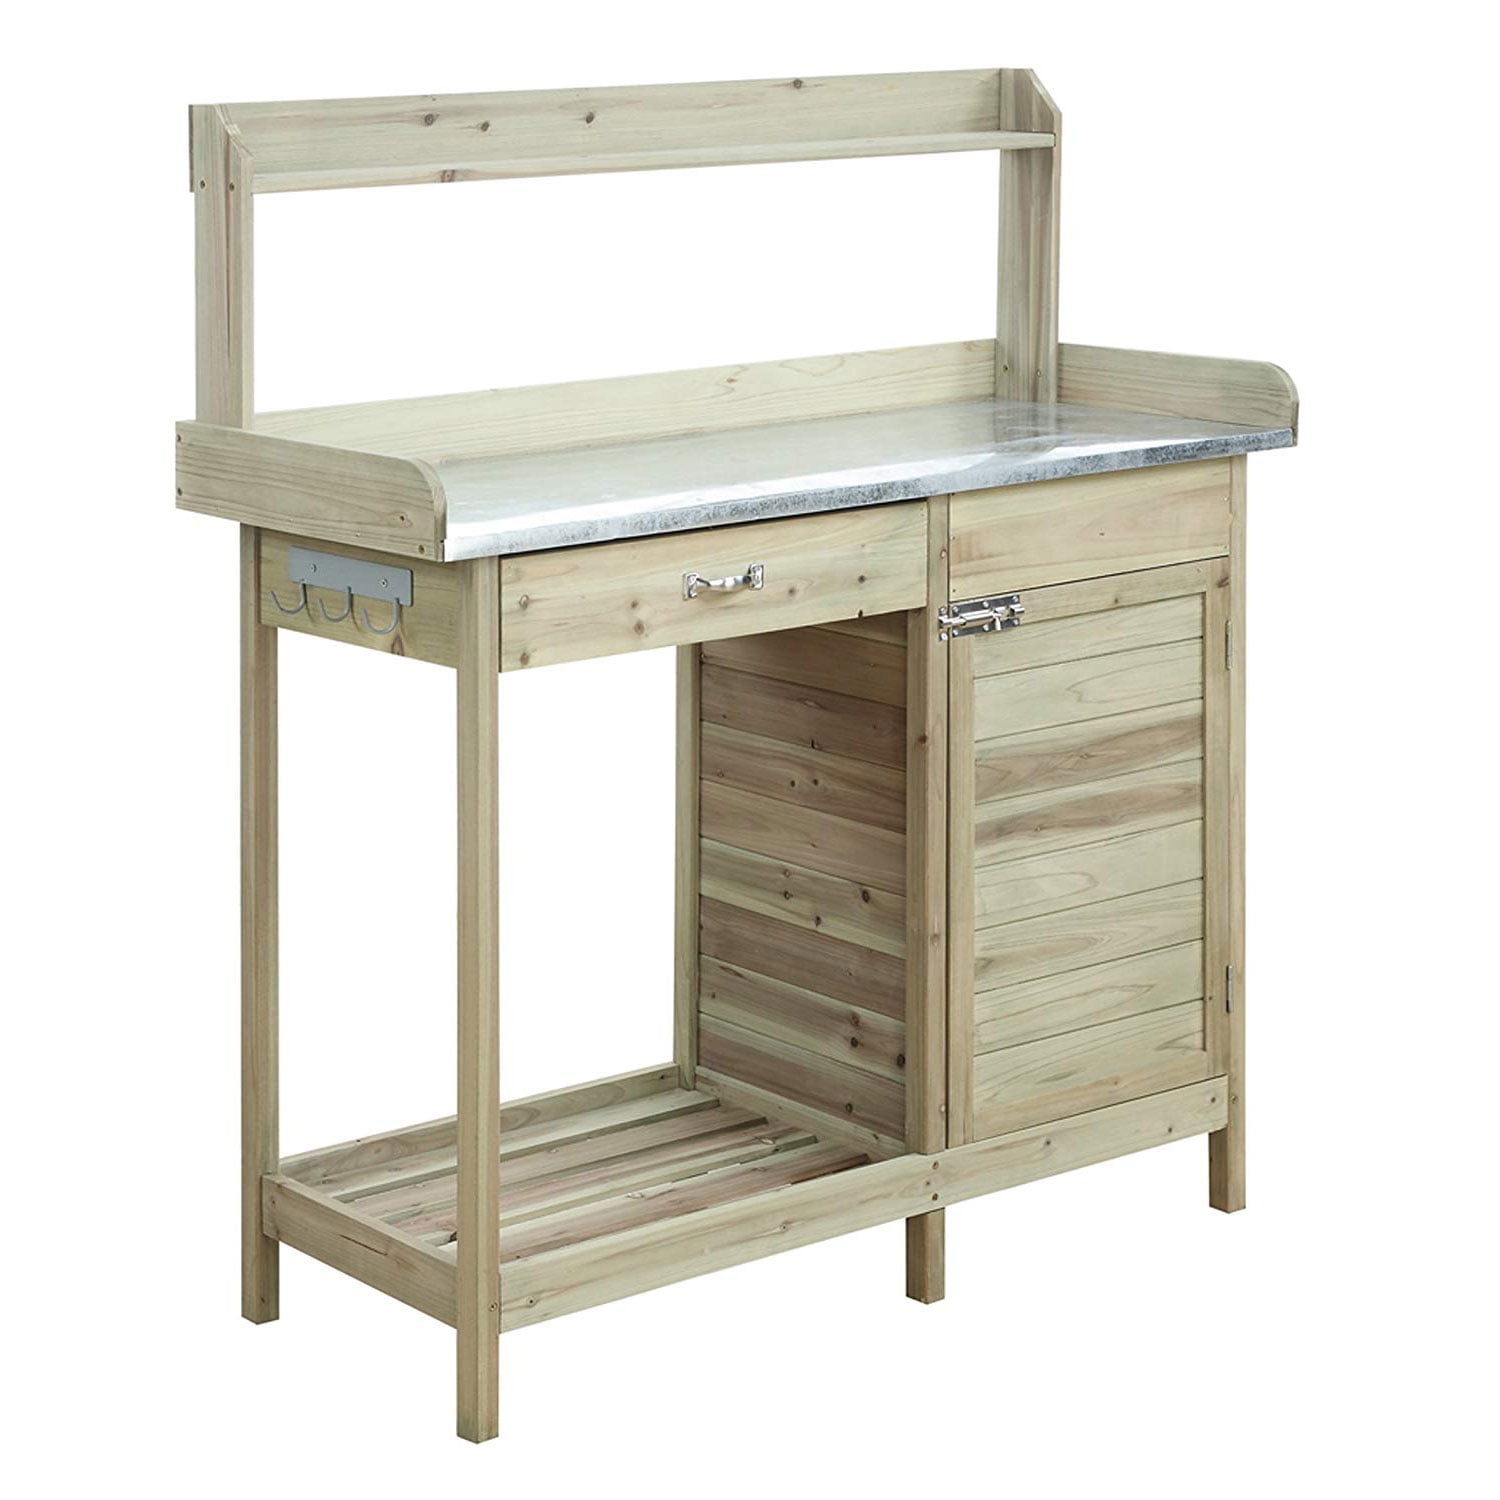 Picture of Convenience Concepts G10440N Planters & Potts Deluxe Potting Bench with Cabinet - Natural Fir